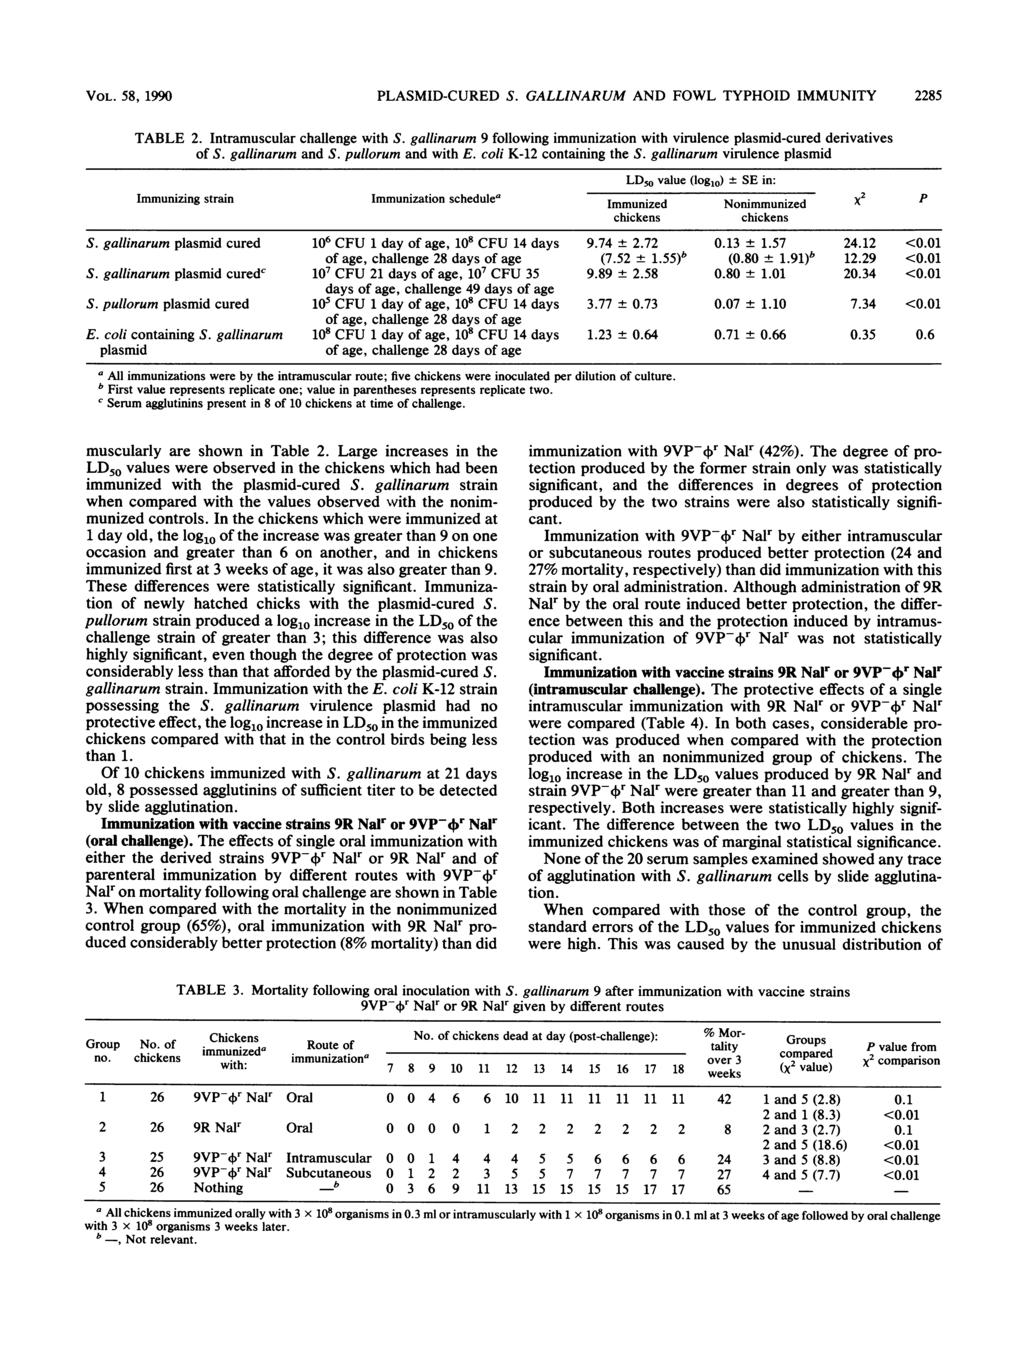 VOL. 58, 1990 PLASMID-CURED S. GALLINARUM AND FOWL TYPHOID IMMUNITY 2285 TABLE 2. Intrmusculr chllenge with S. gllinrum 9 following immuniztion with virulence plsmid-cured derivtives of S.